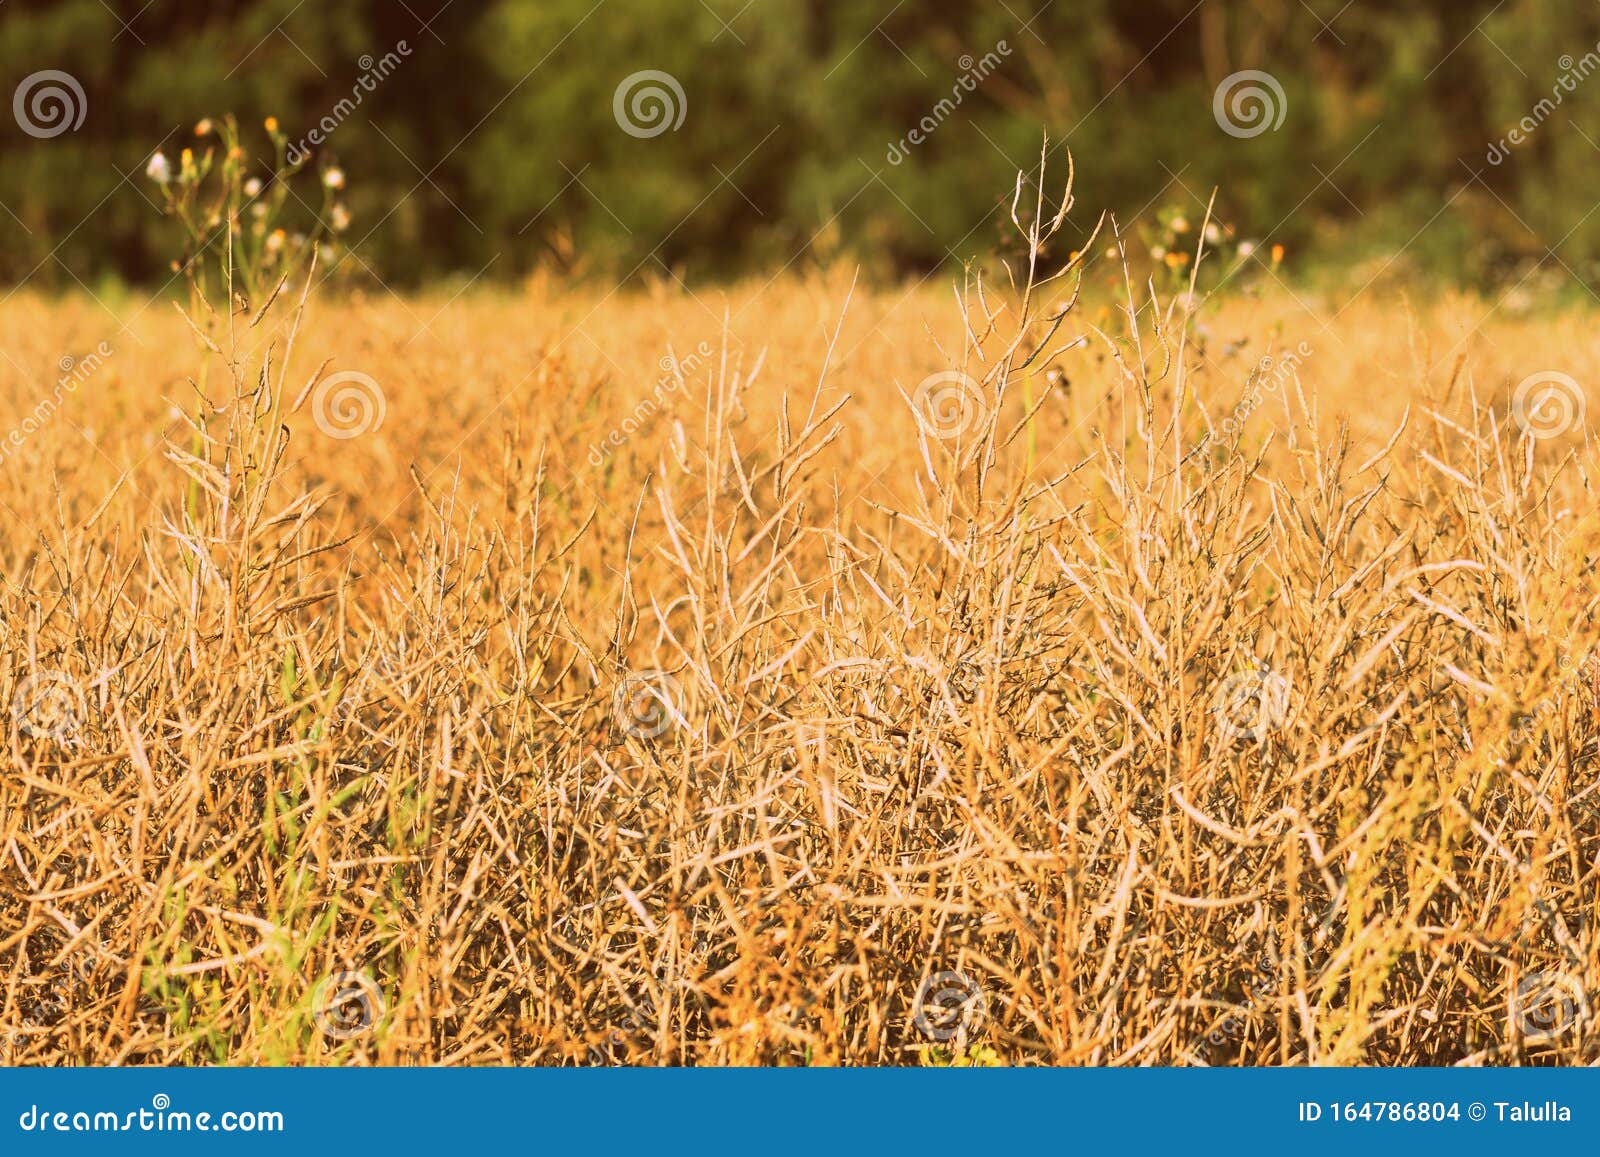 Dry Grass Closeup on a Sunlit Meadow on a Summer Day. Retro Style Toned